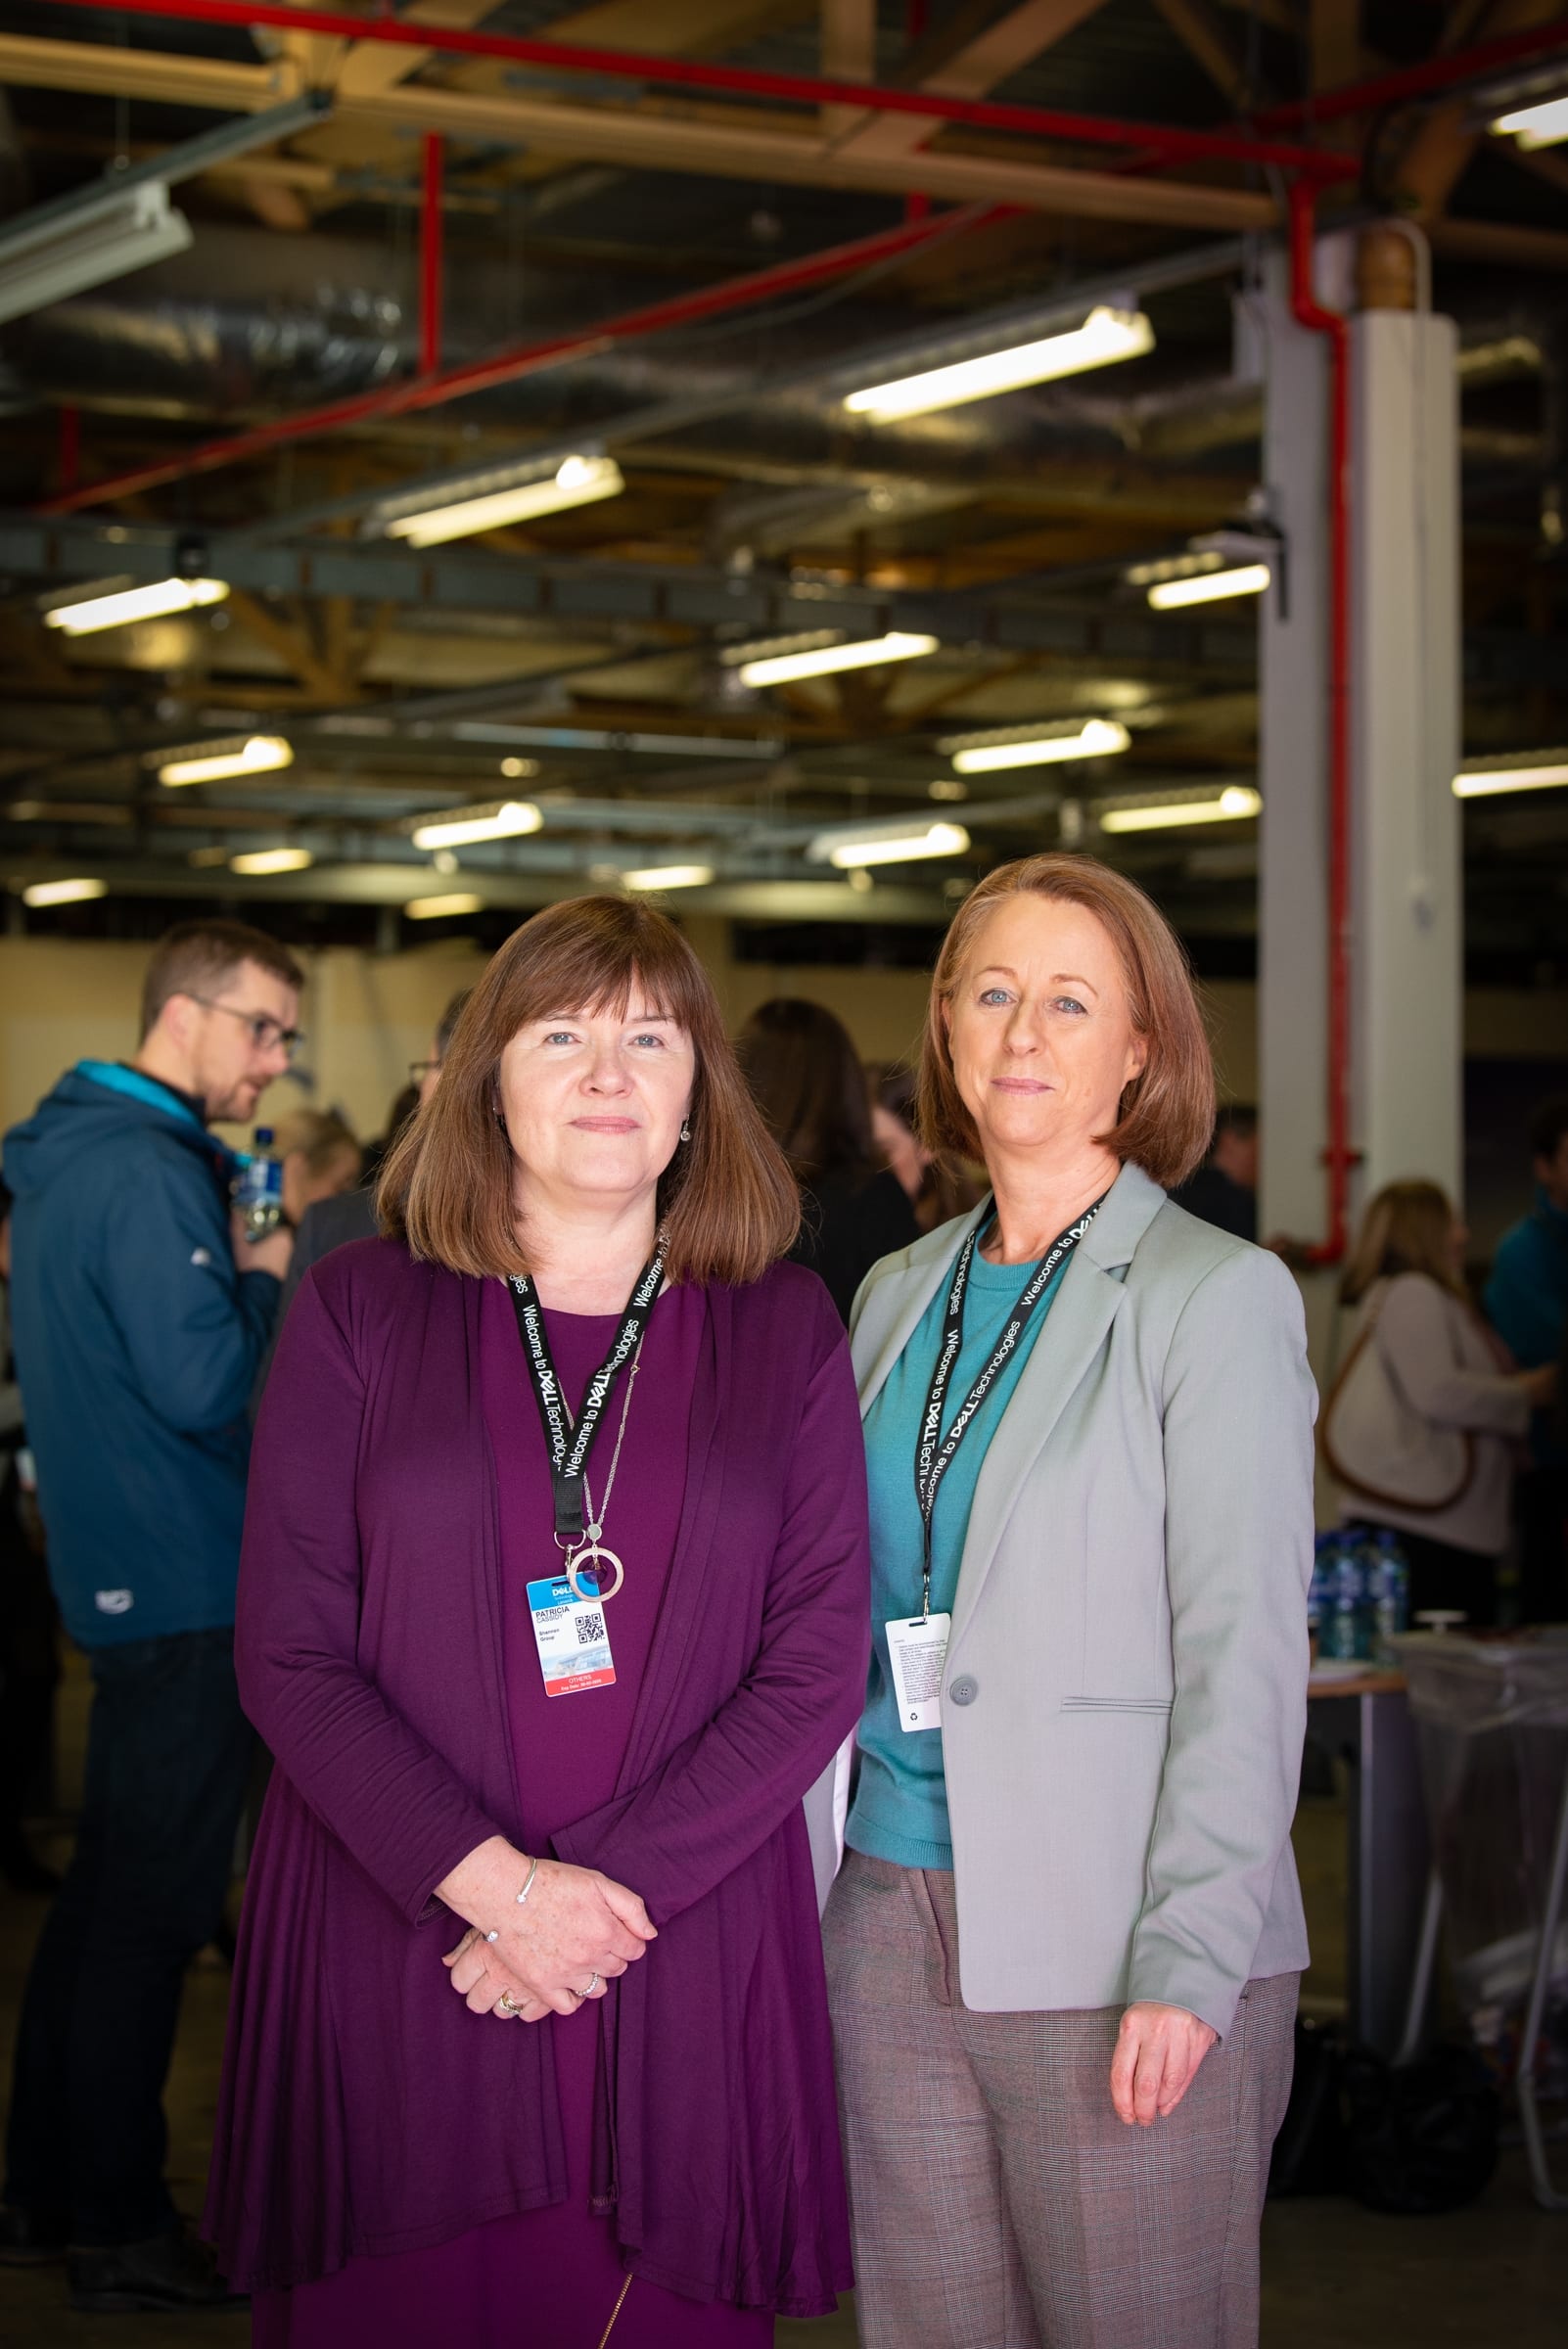 No repro fee-RLP Programme Launch which was held in DELL EMC, Raheen Industrial Est Limerick on Thursday 6th February - From Left to Right: Patricia Cassidy - Shannon Group, Lorraine Ryan - Shannon Group. 
Photo credit Shauna Kennedy